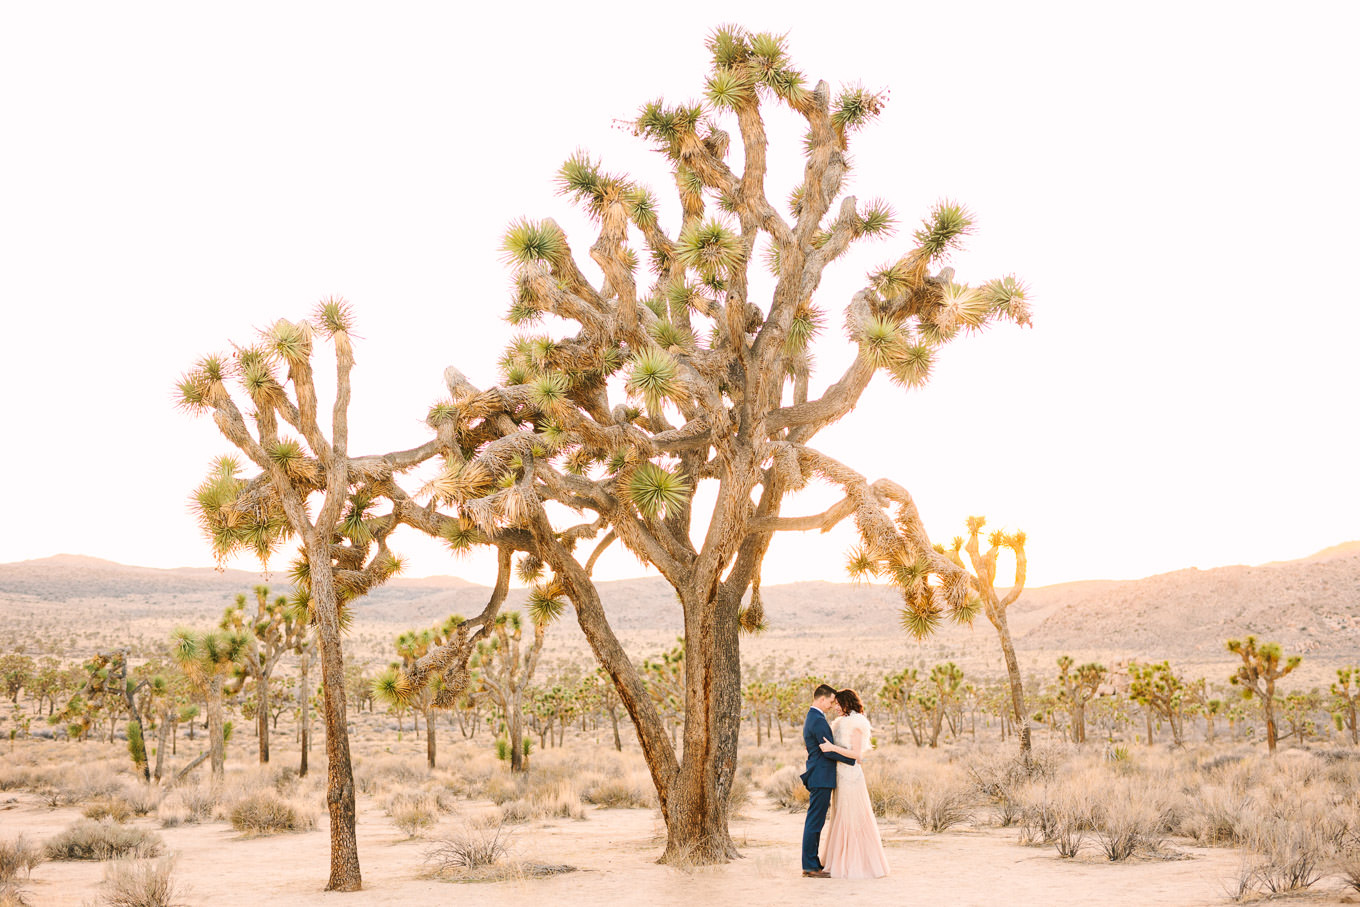 Joshua Tree elopement | Wedding and elopement photography roundup | Los Angeles and Palm Springs photographer | #losangeleswedding #palmspringswedding #elopementphotographer Source: Mary Costa Photography | Los Angeles